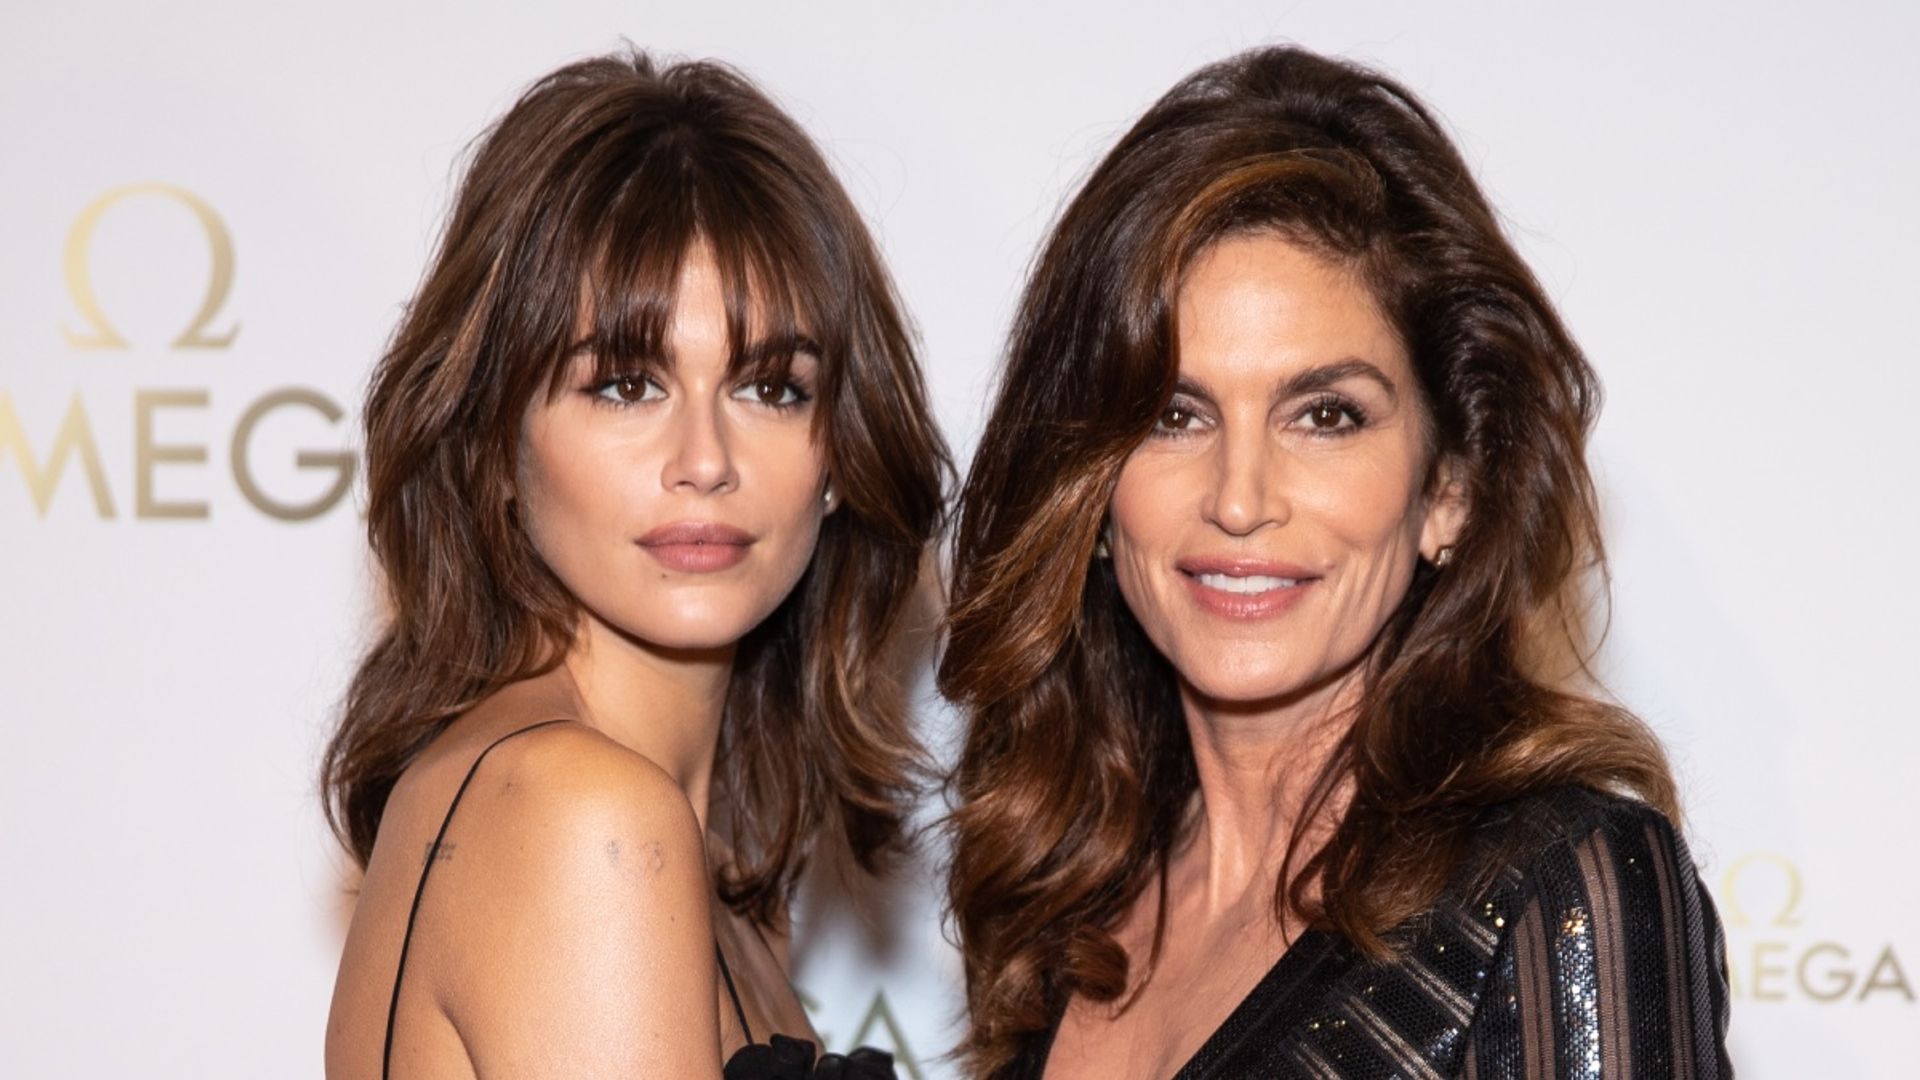 Cindy Crawford twins with daughter Kaia Gerber as pair reunite for red carpet